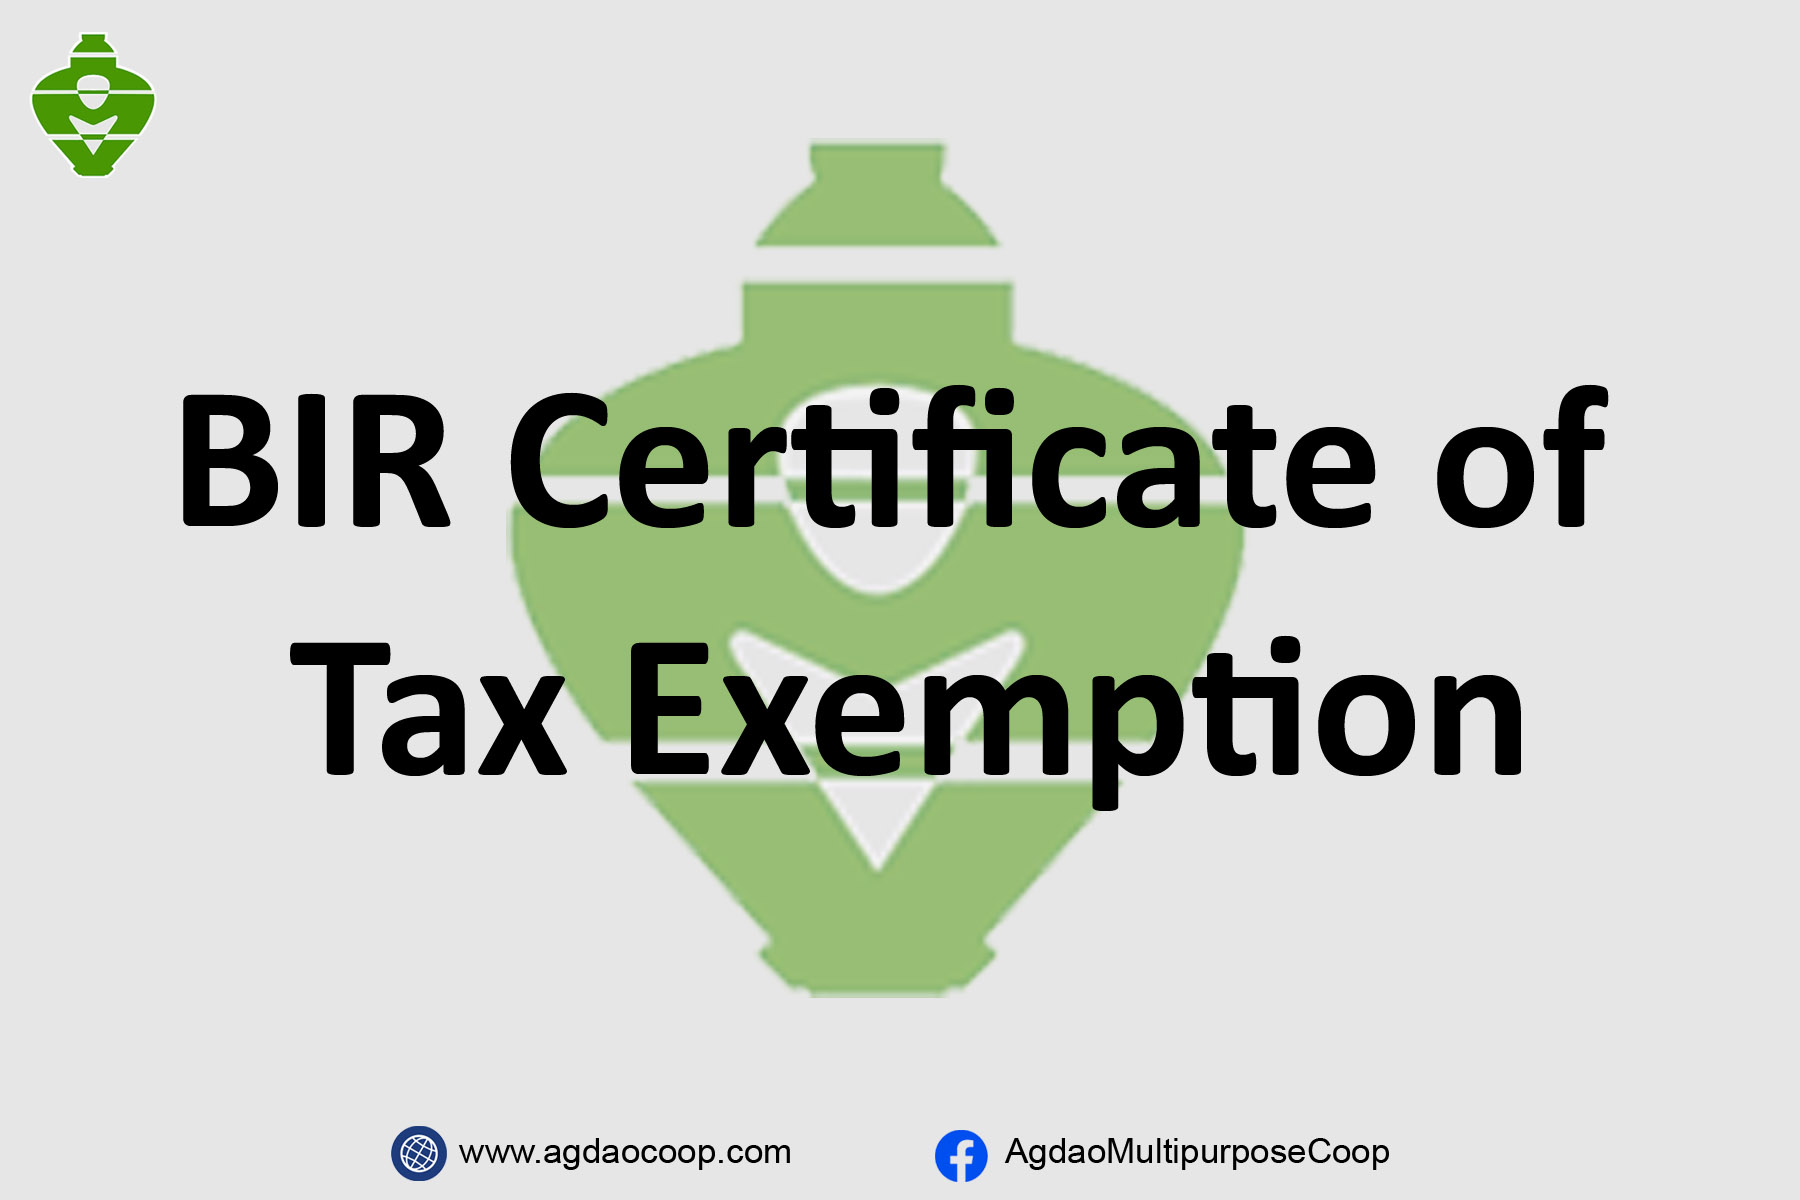 bir-certificate-of-tax-exemption-archives-ampc